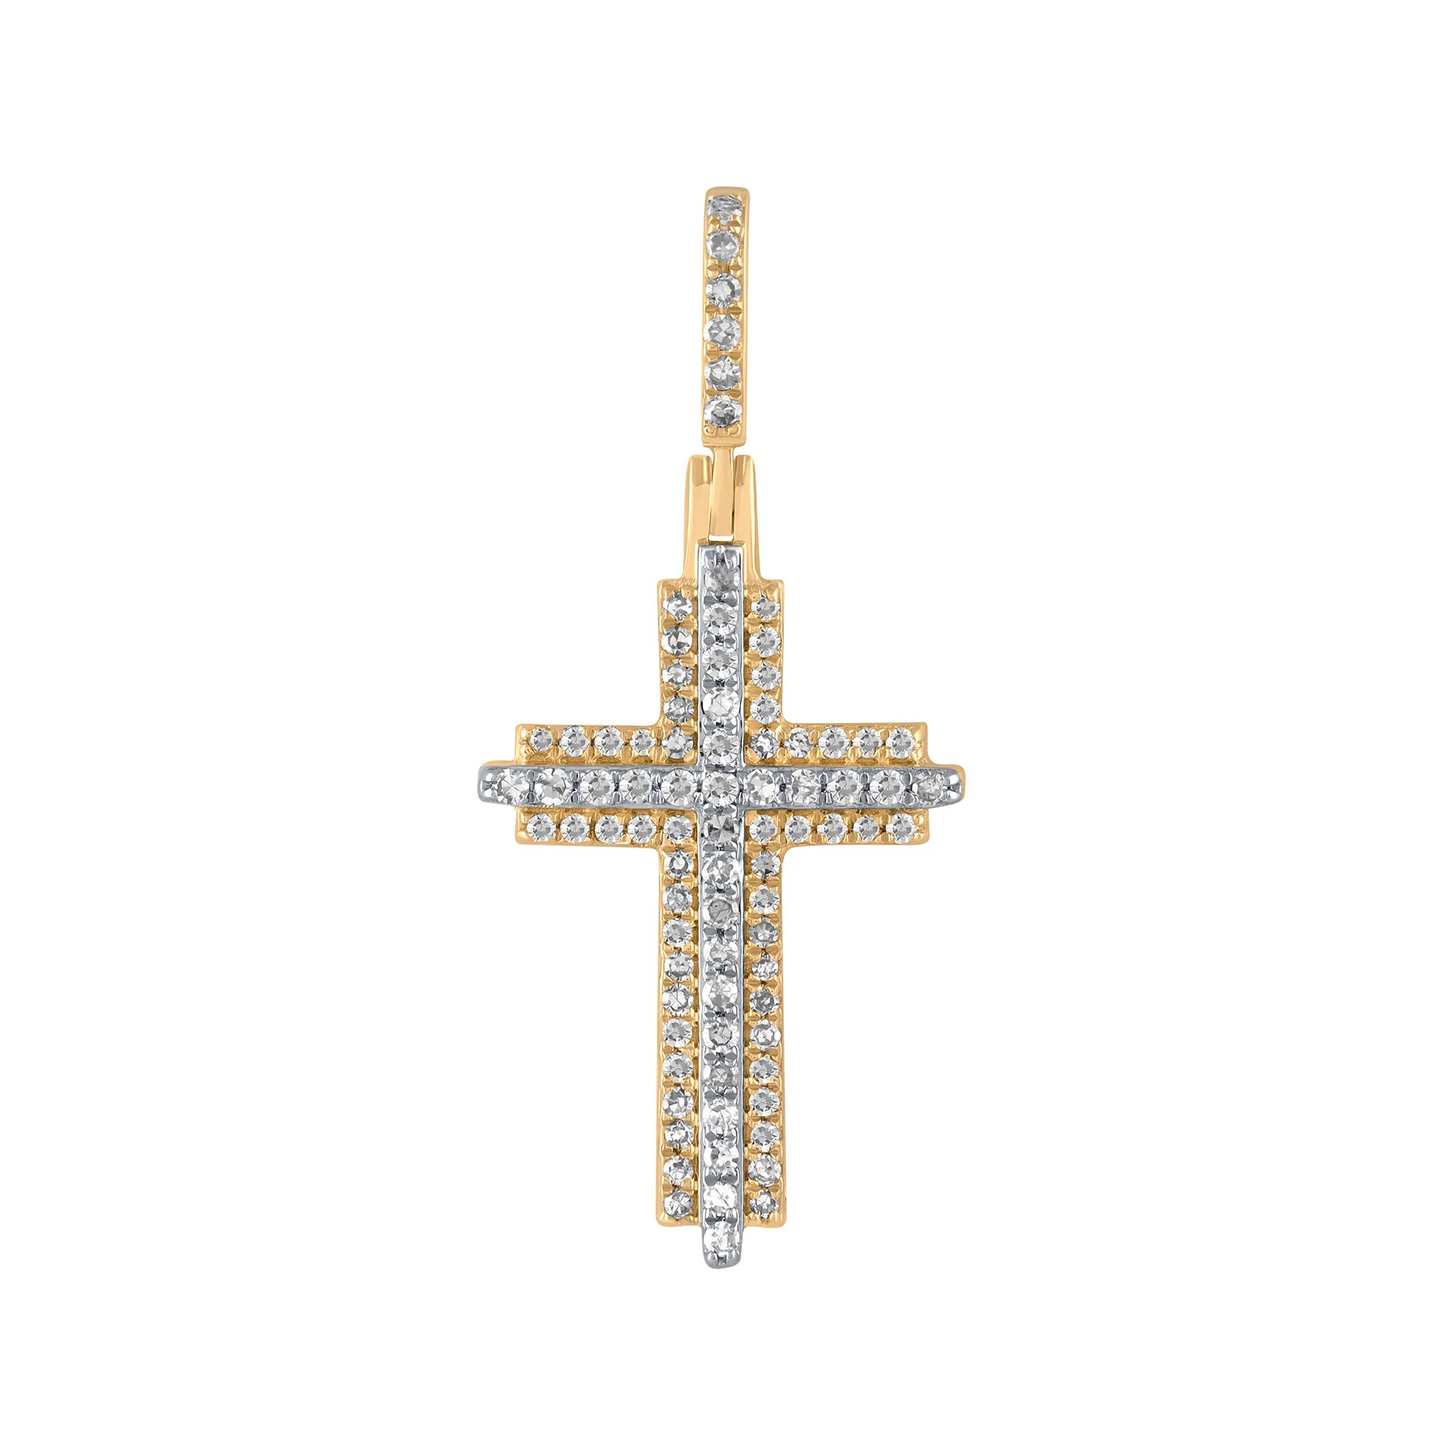 10K YELLOW GOLD .40 CARAT REAL DIAMONDS 1.50 INCHES CROSS PENDANT WITH 18" GOLD CHAIN / SKU PD03983-YG